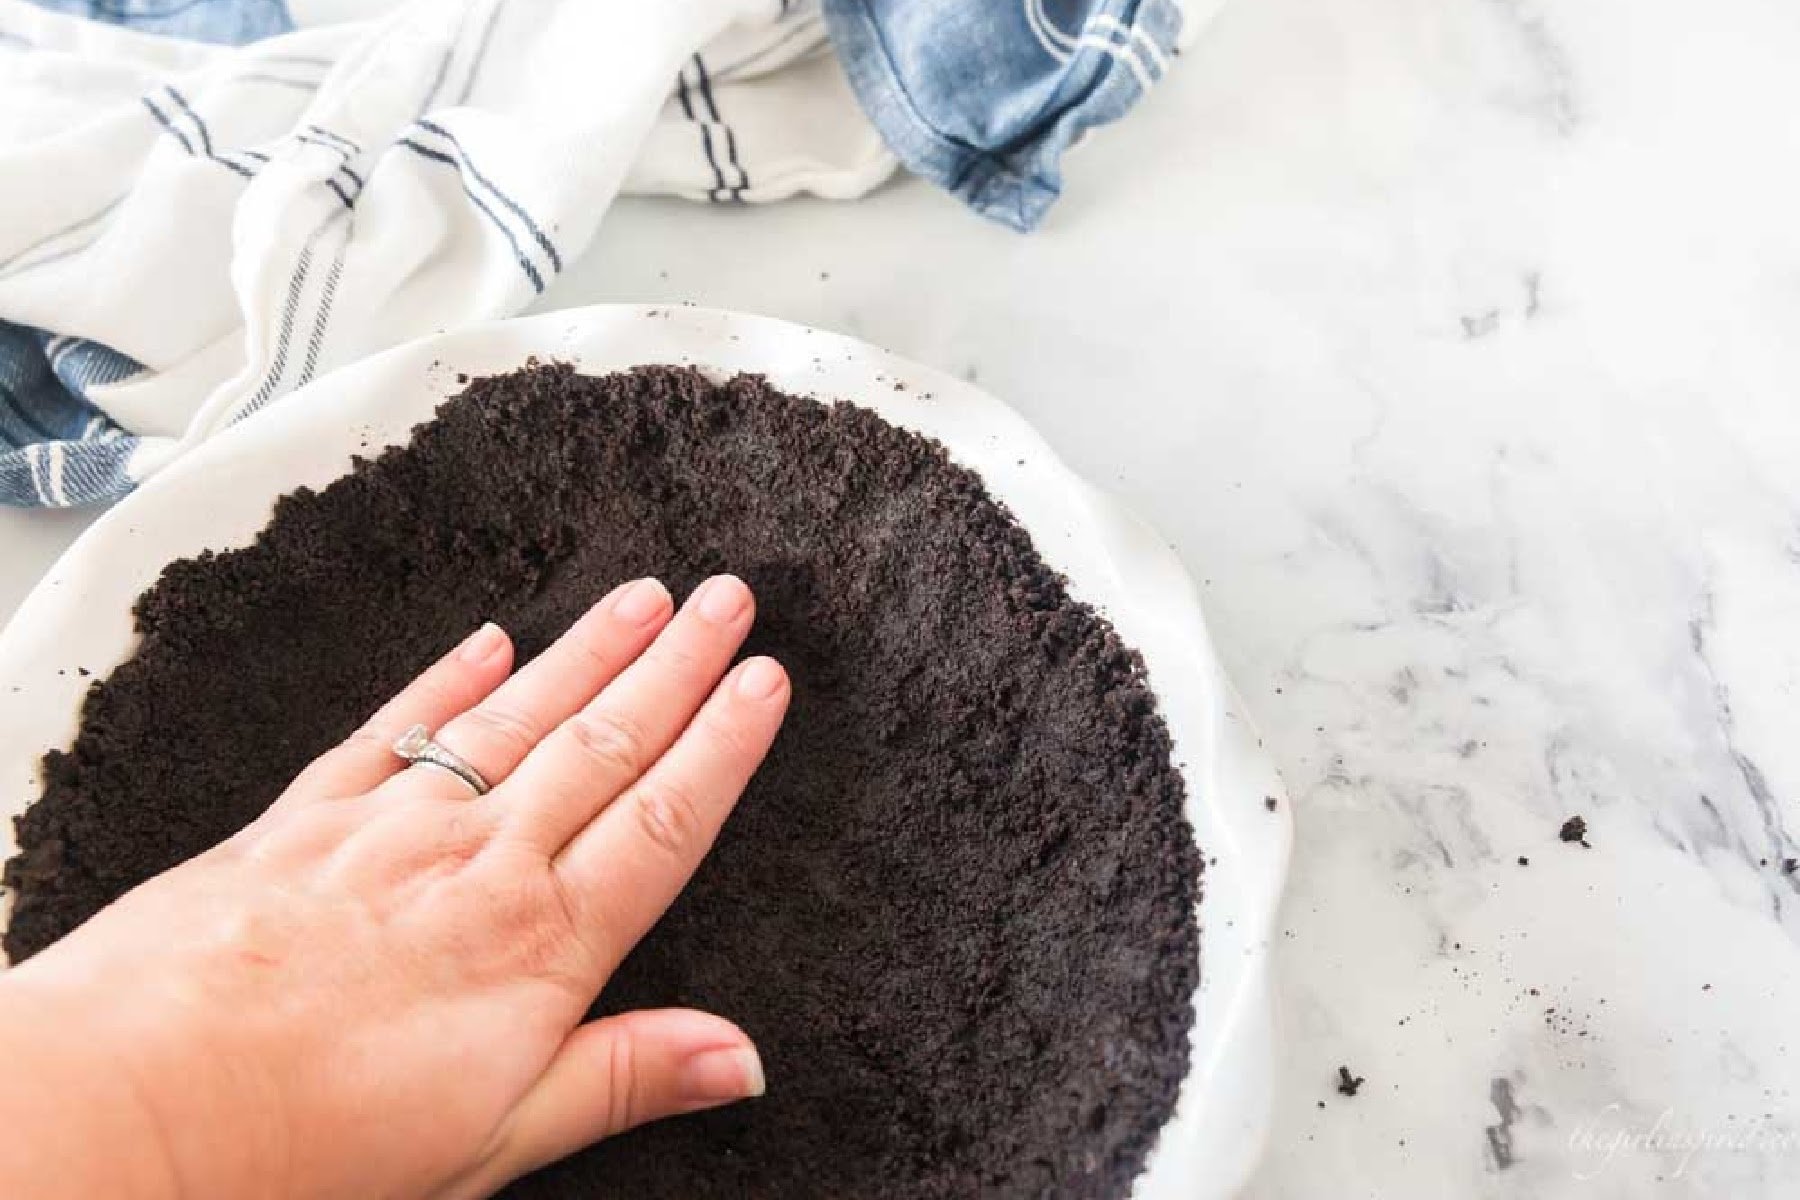 Pressing Oreo cookie crust into a pie plate with fingertips.